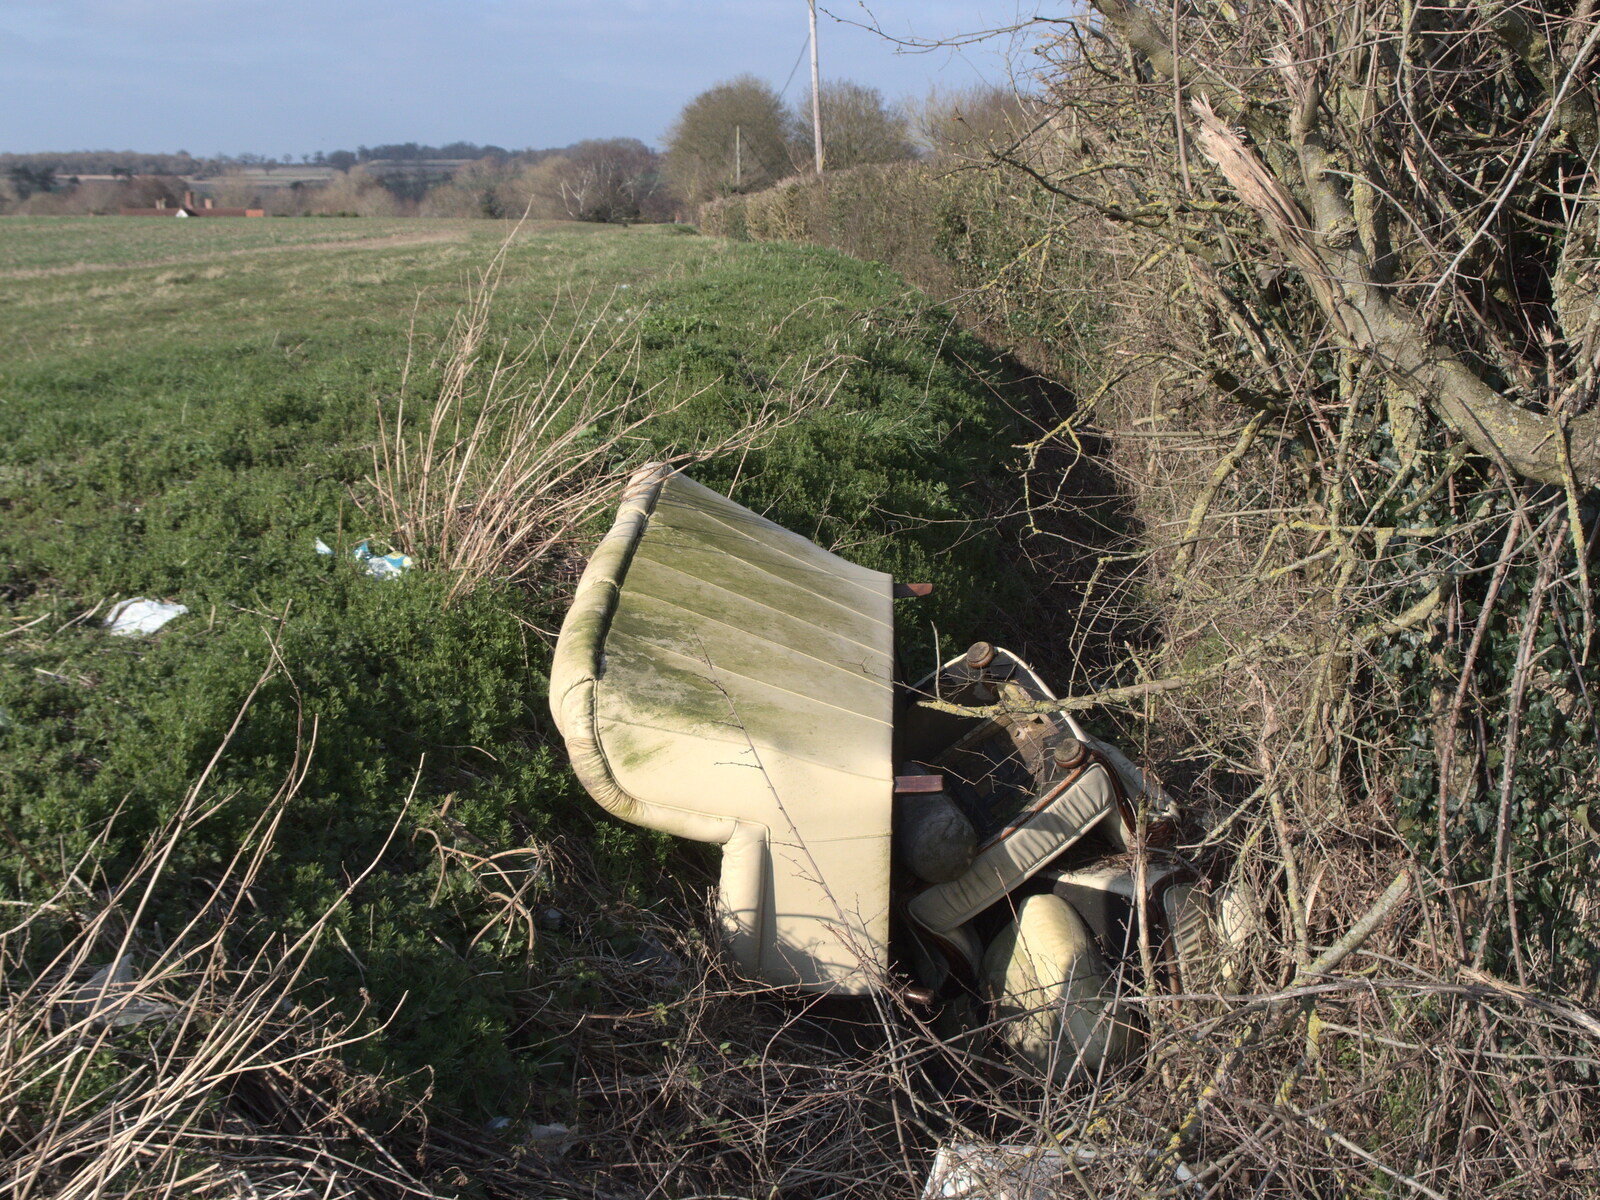 Some knob has chucked a sofa in the hedge in Oakley from A Vaccine Postcard from Harleston, Norfolk - 22nd March 2021